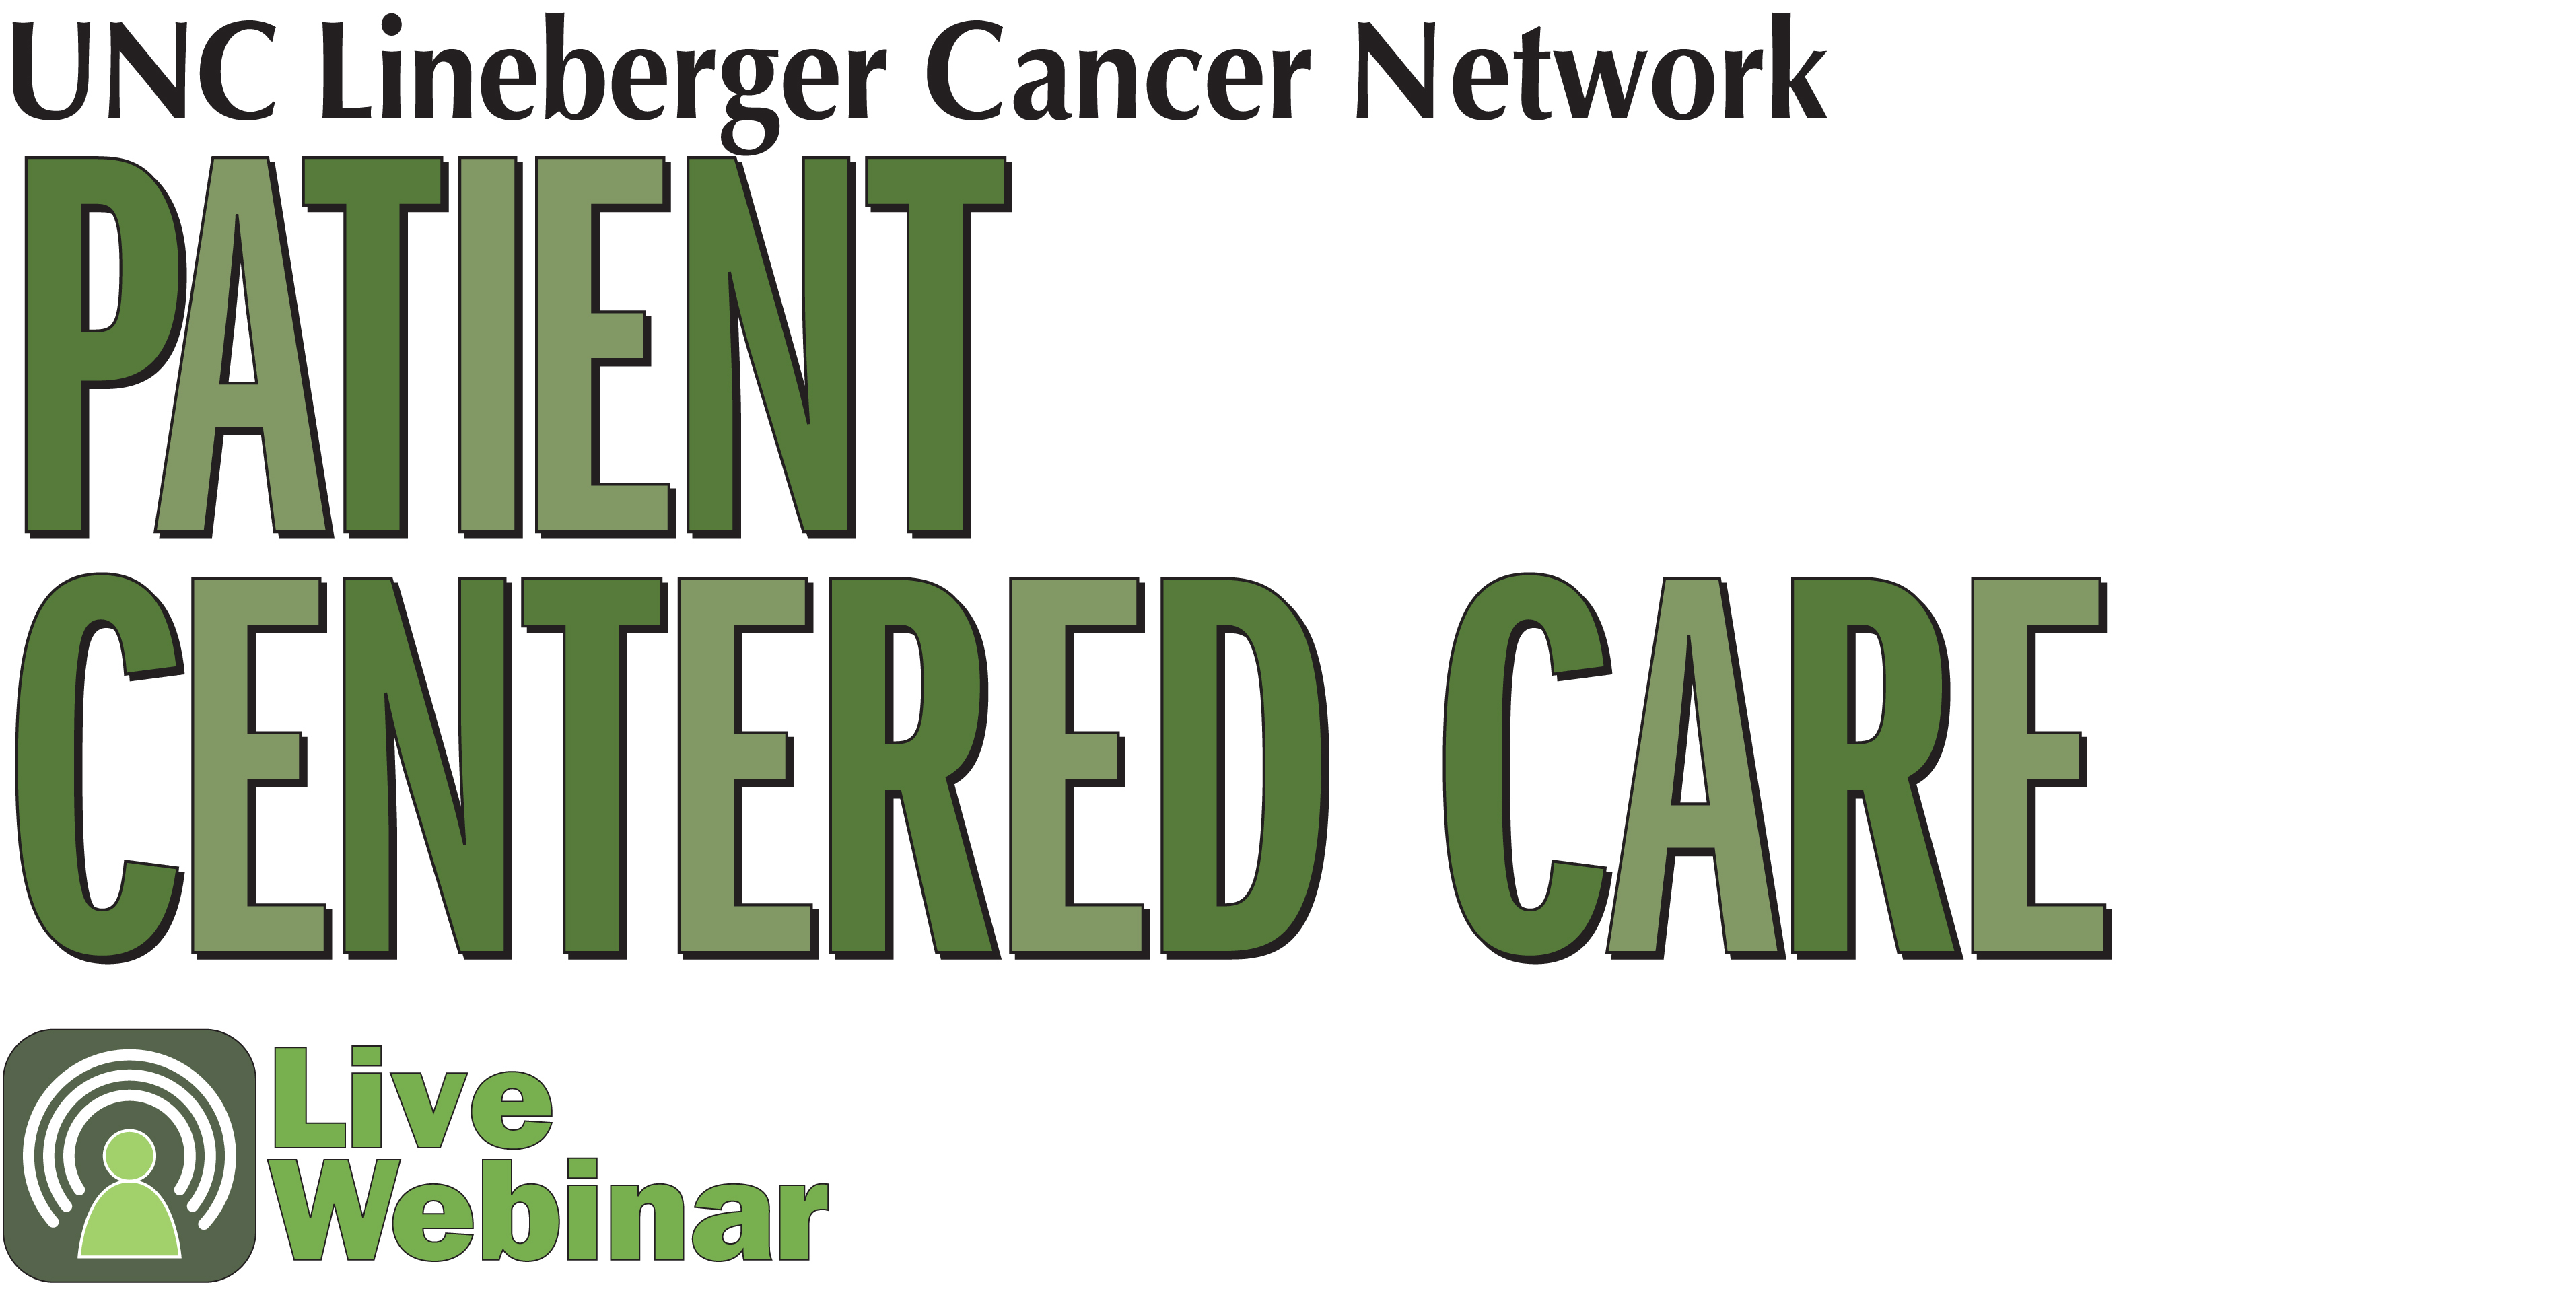 UNC Cancer Network Presents a Patient Centered Care Lecture